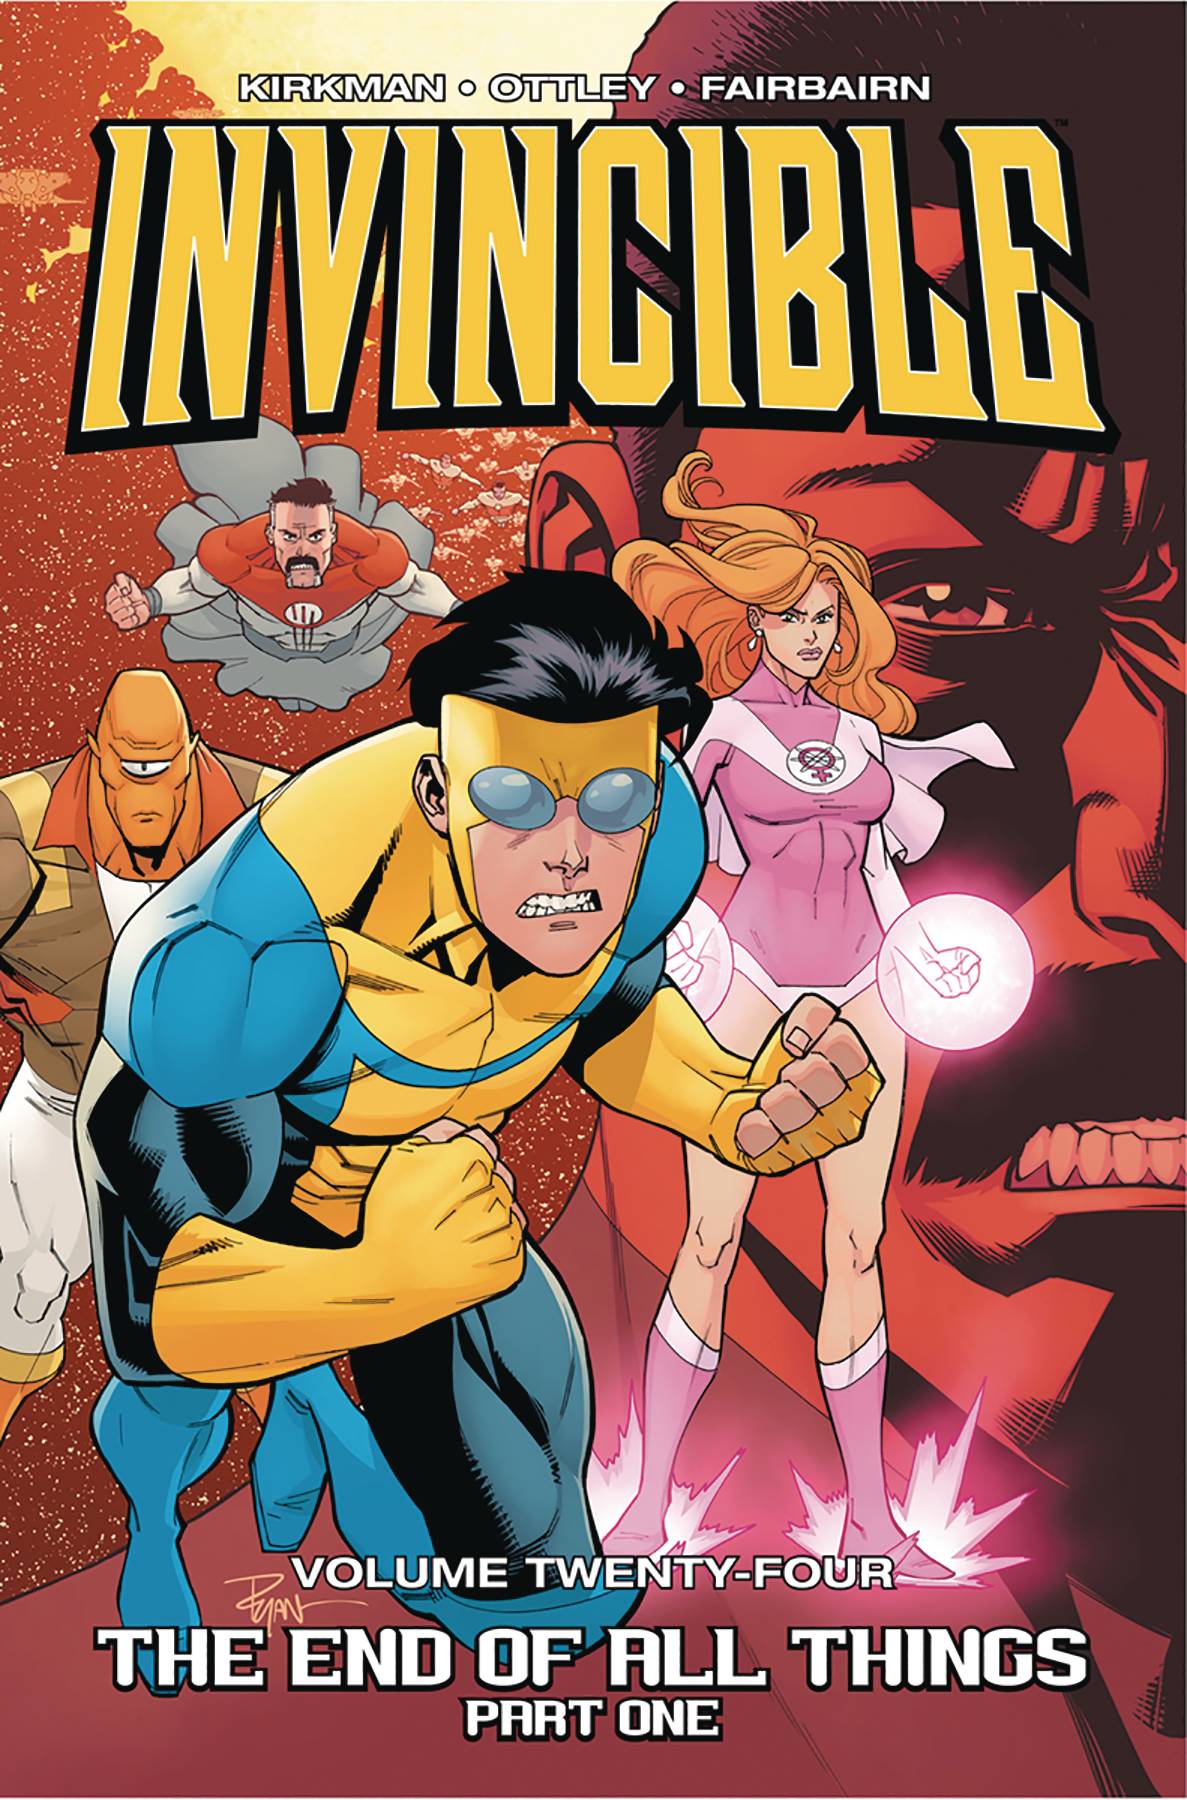 INVINCIBLE TP VOL 24 END OF ALL THINGS PART 1 (JUL170817) (M